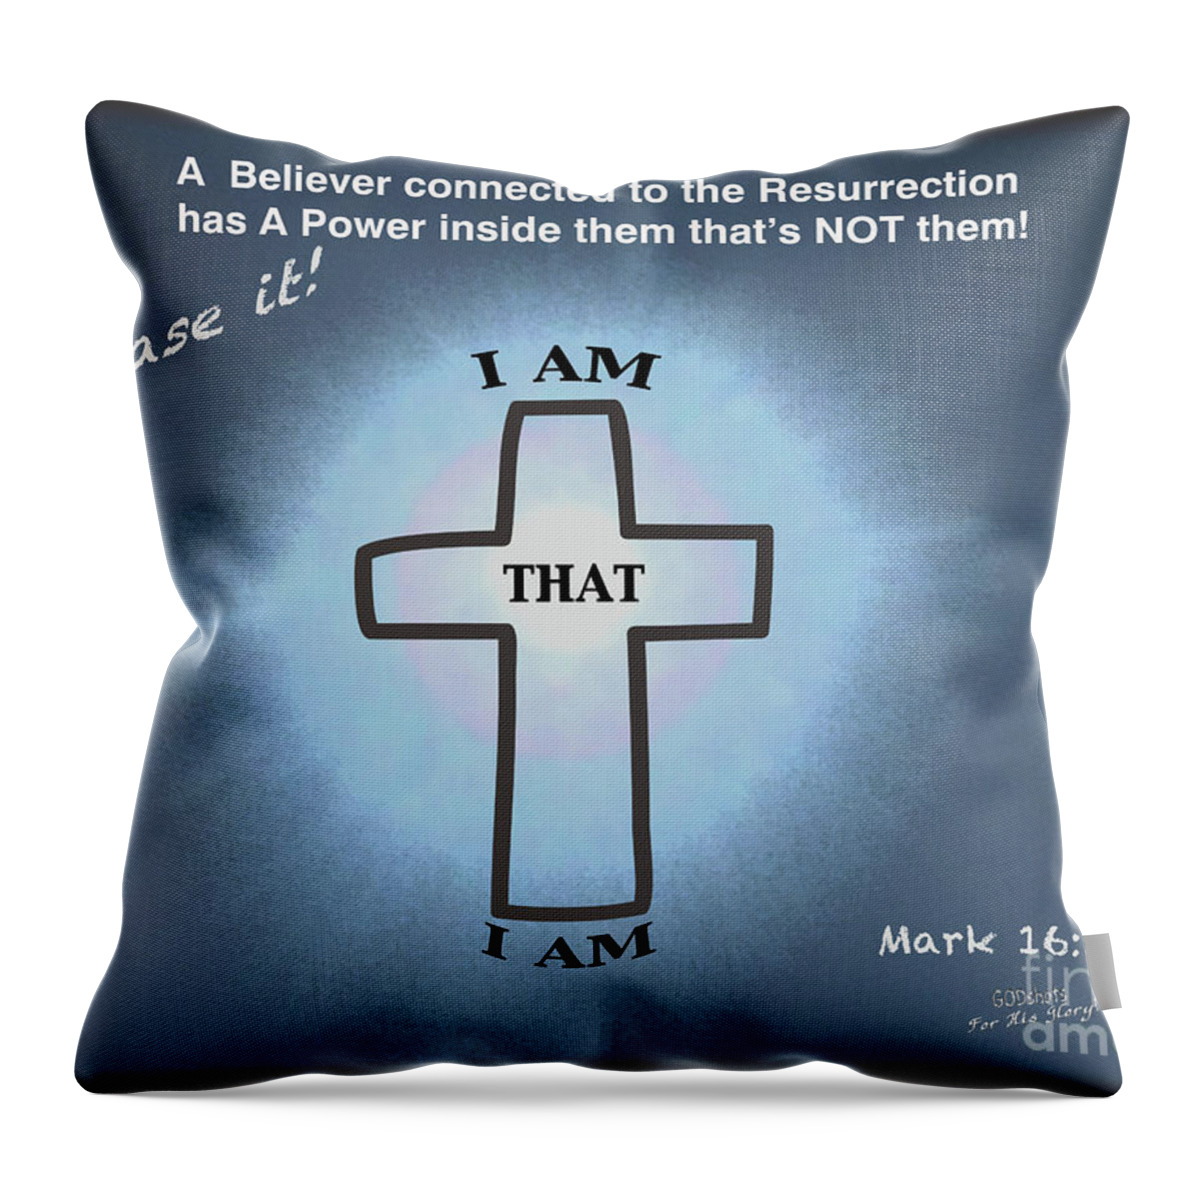  Throw Pillow featuring the mixed media I Am by Lori Tondini